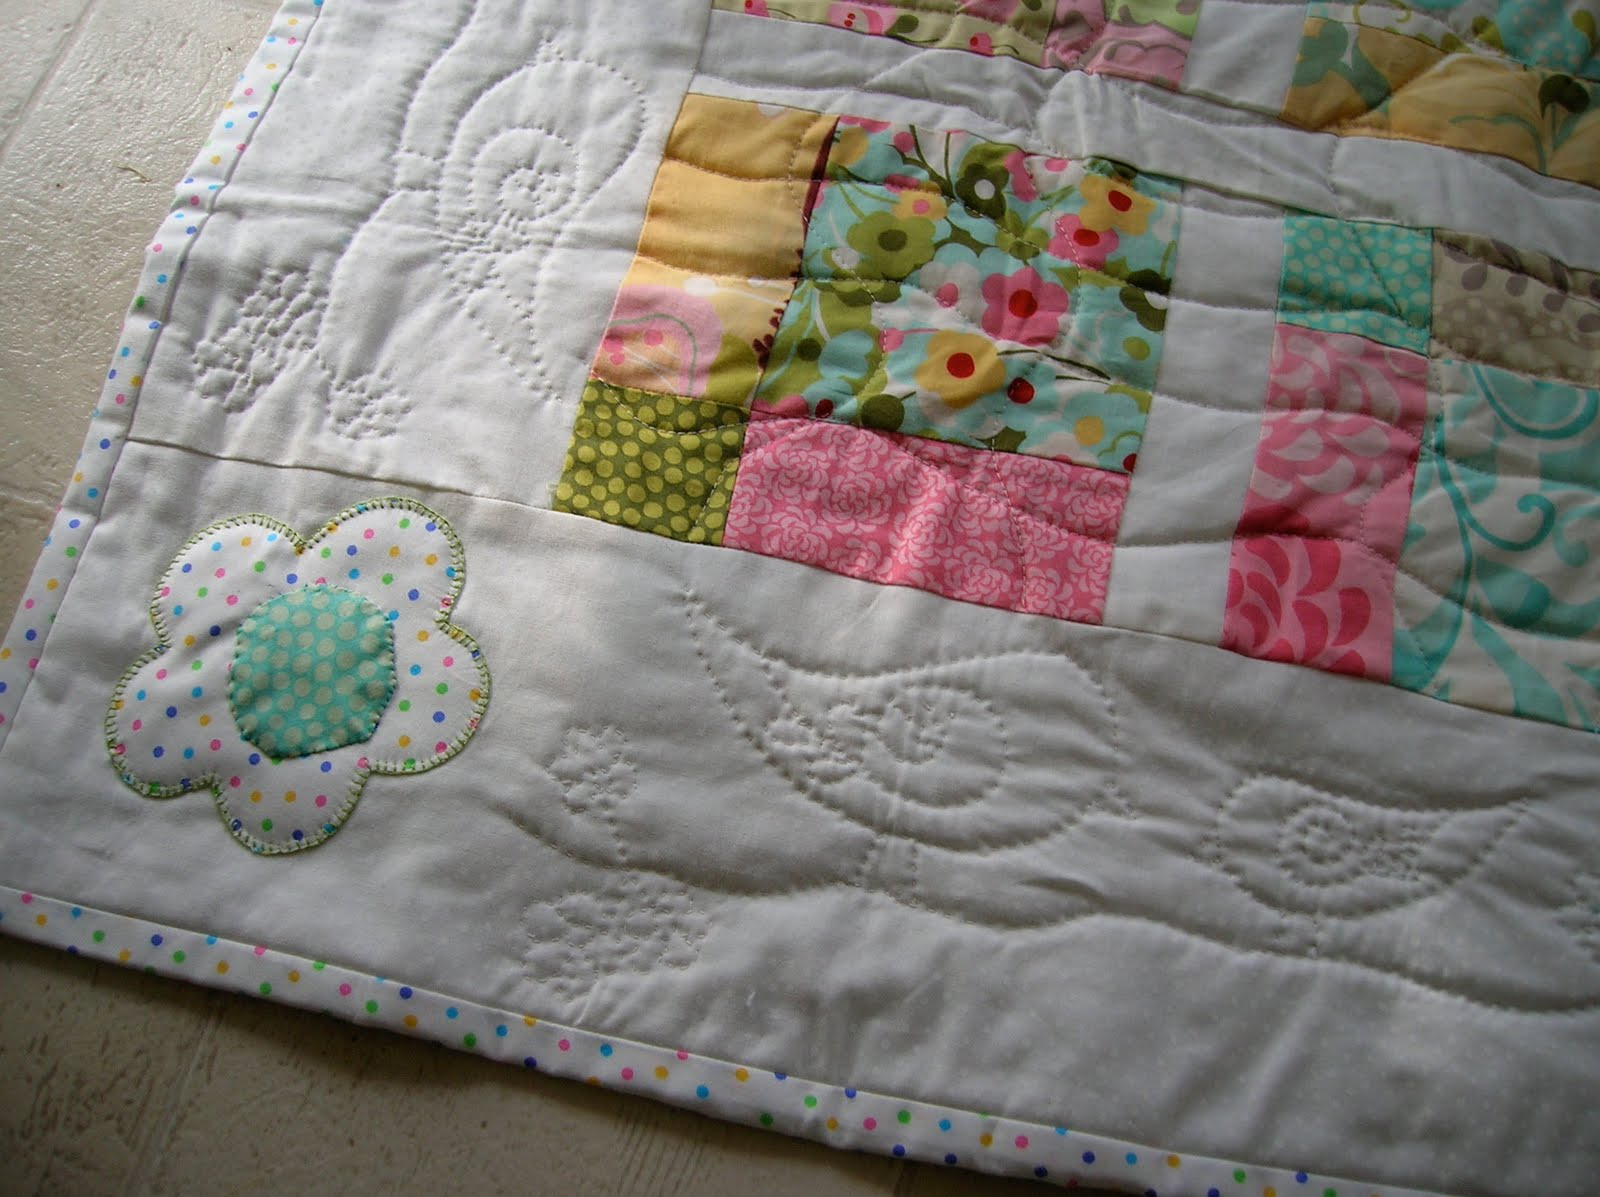 Embroidery Patterns For Quilts Hand Embroidery Quilting Free Embroidery Patterns Solid Bedspreads